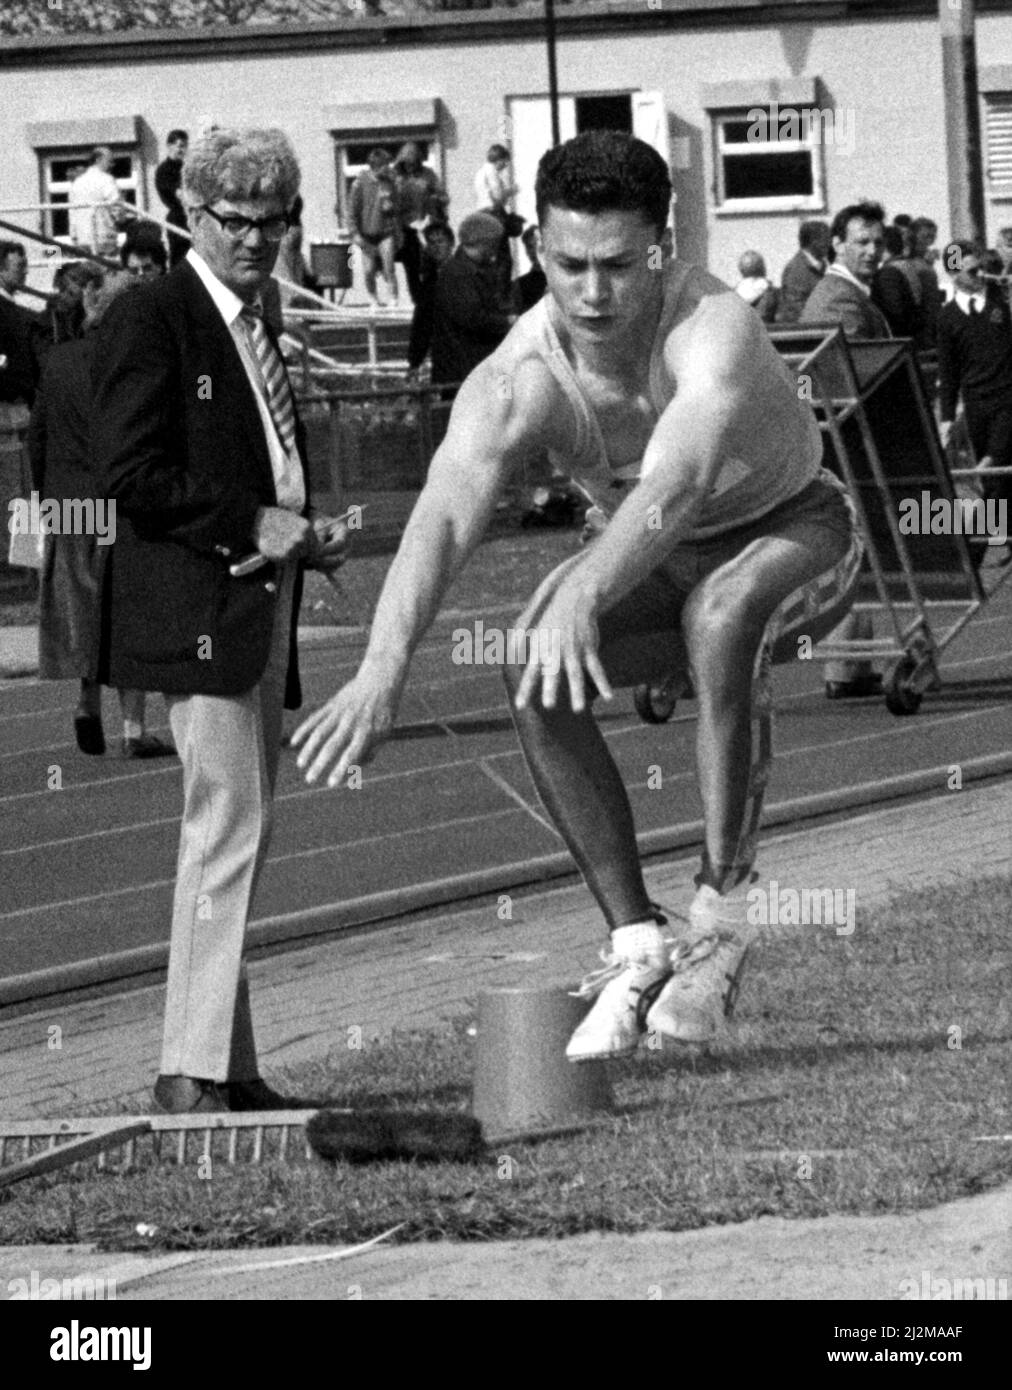 Athlete Jonathan Edwards Jonathan Edwards competes in the North East Counties Athletic Championship at Jarrow 20 May 1989 - he was the easy winner as he was the only athlete taking part in the triple jump Stock Photo